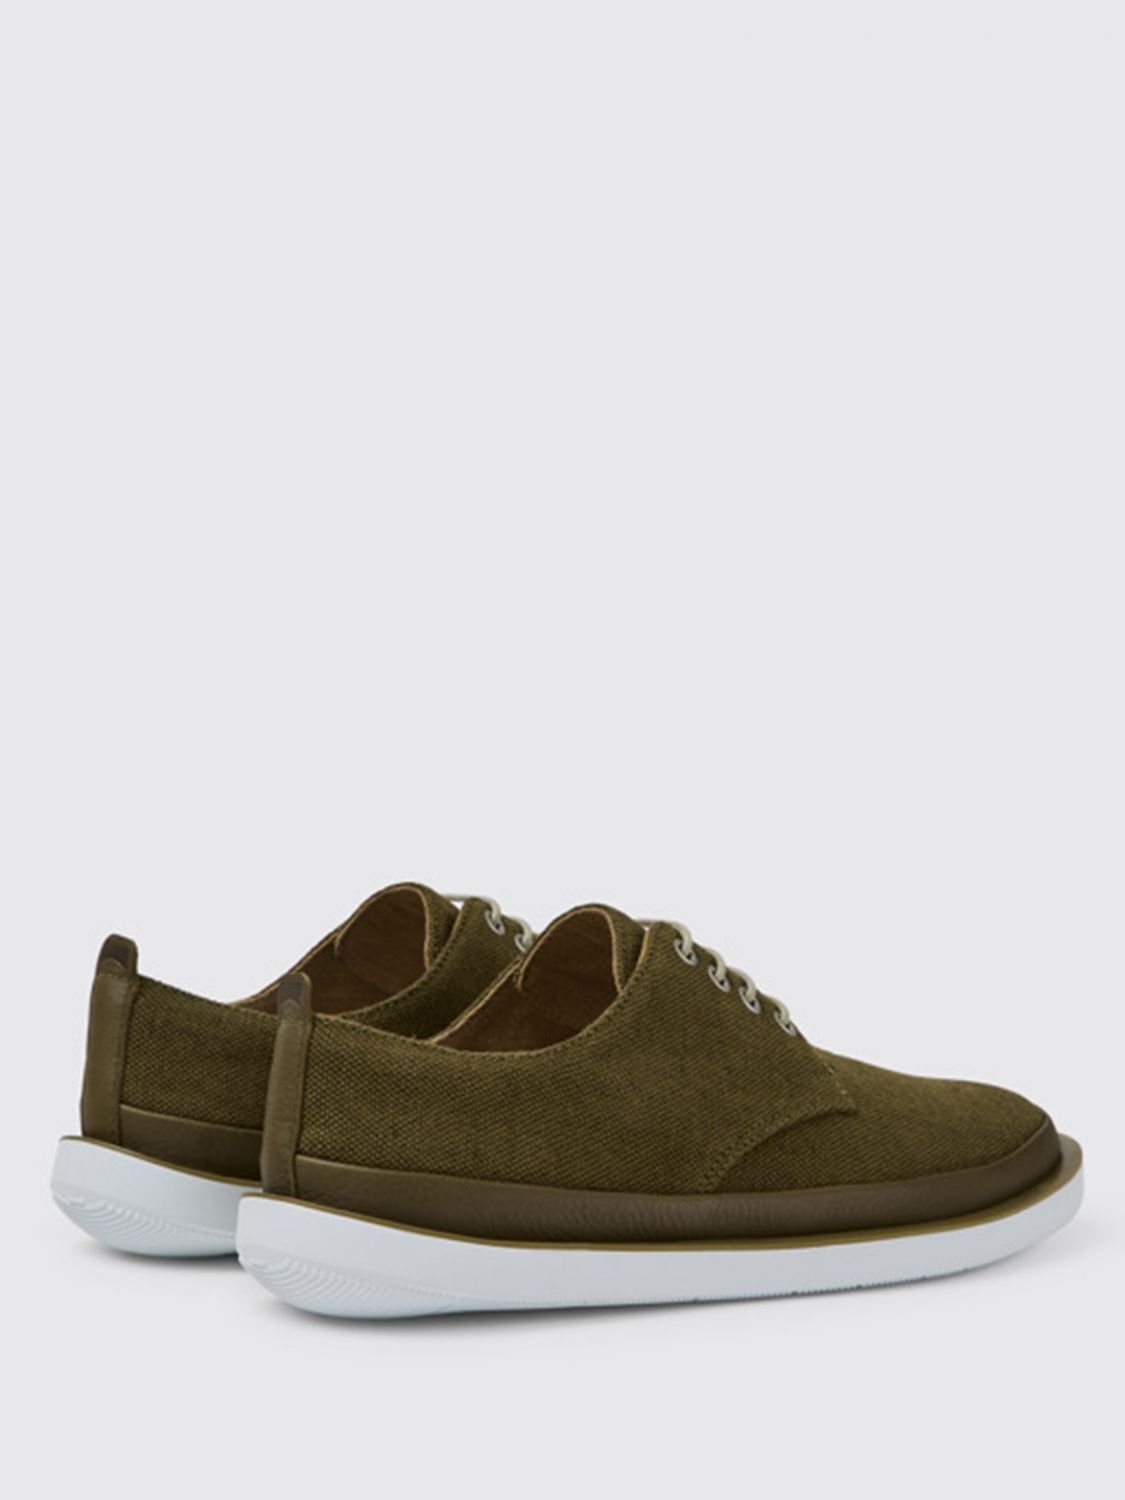 Camper Outlet: Wagon shoes in calfskin and hemp - Green | Camper brogue ...